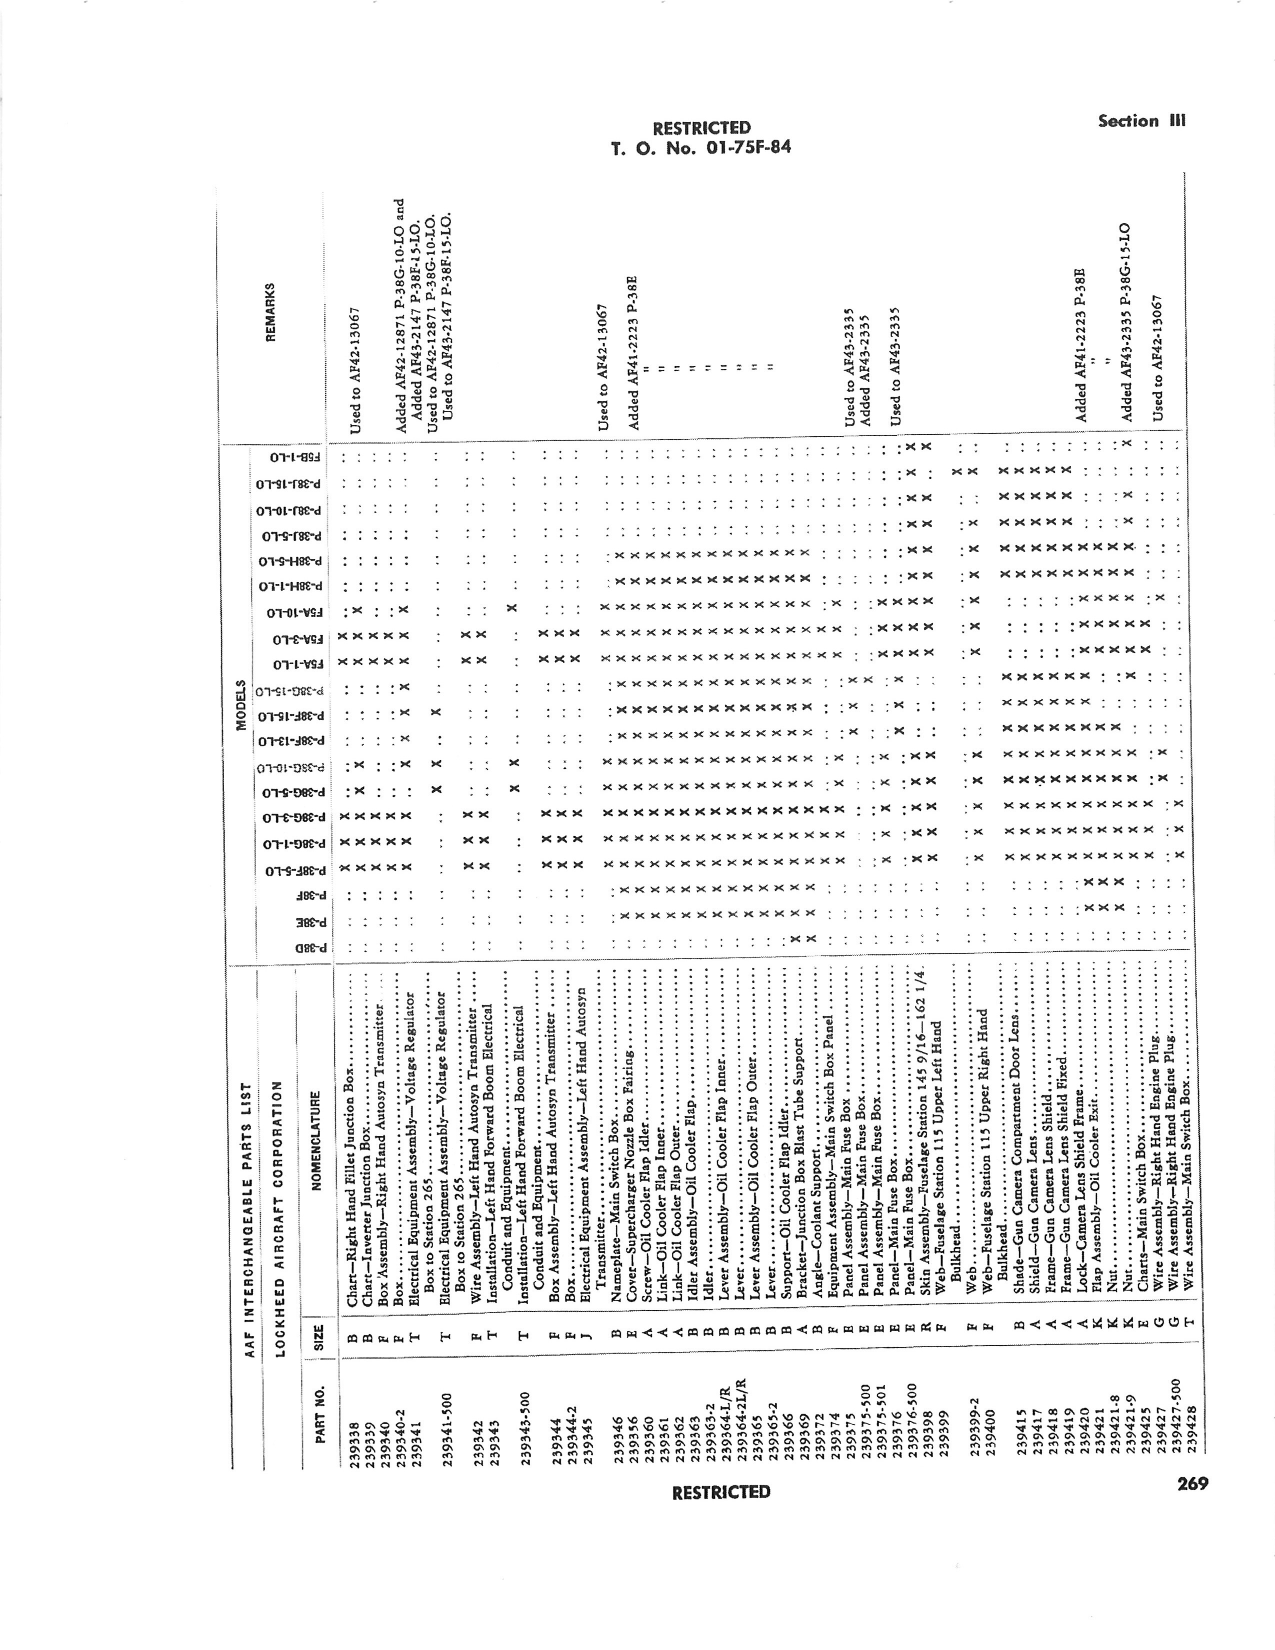 Sample page 271 from AirCorps Library document: Interchangeable Parts List - P-38